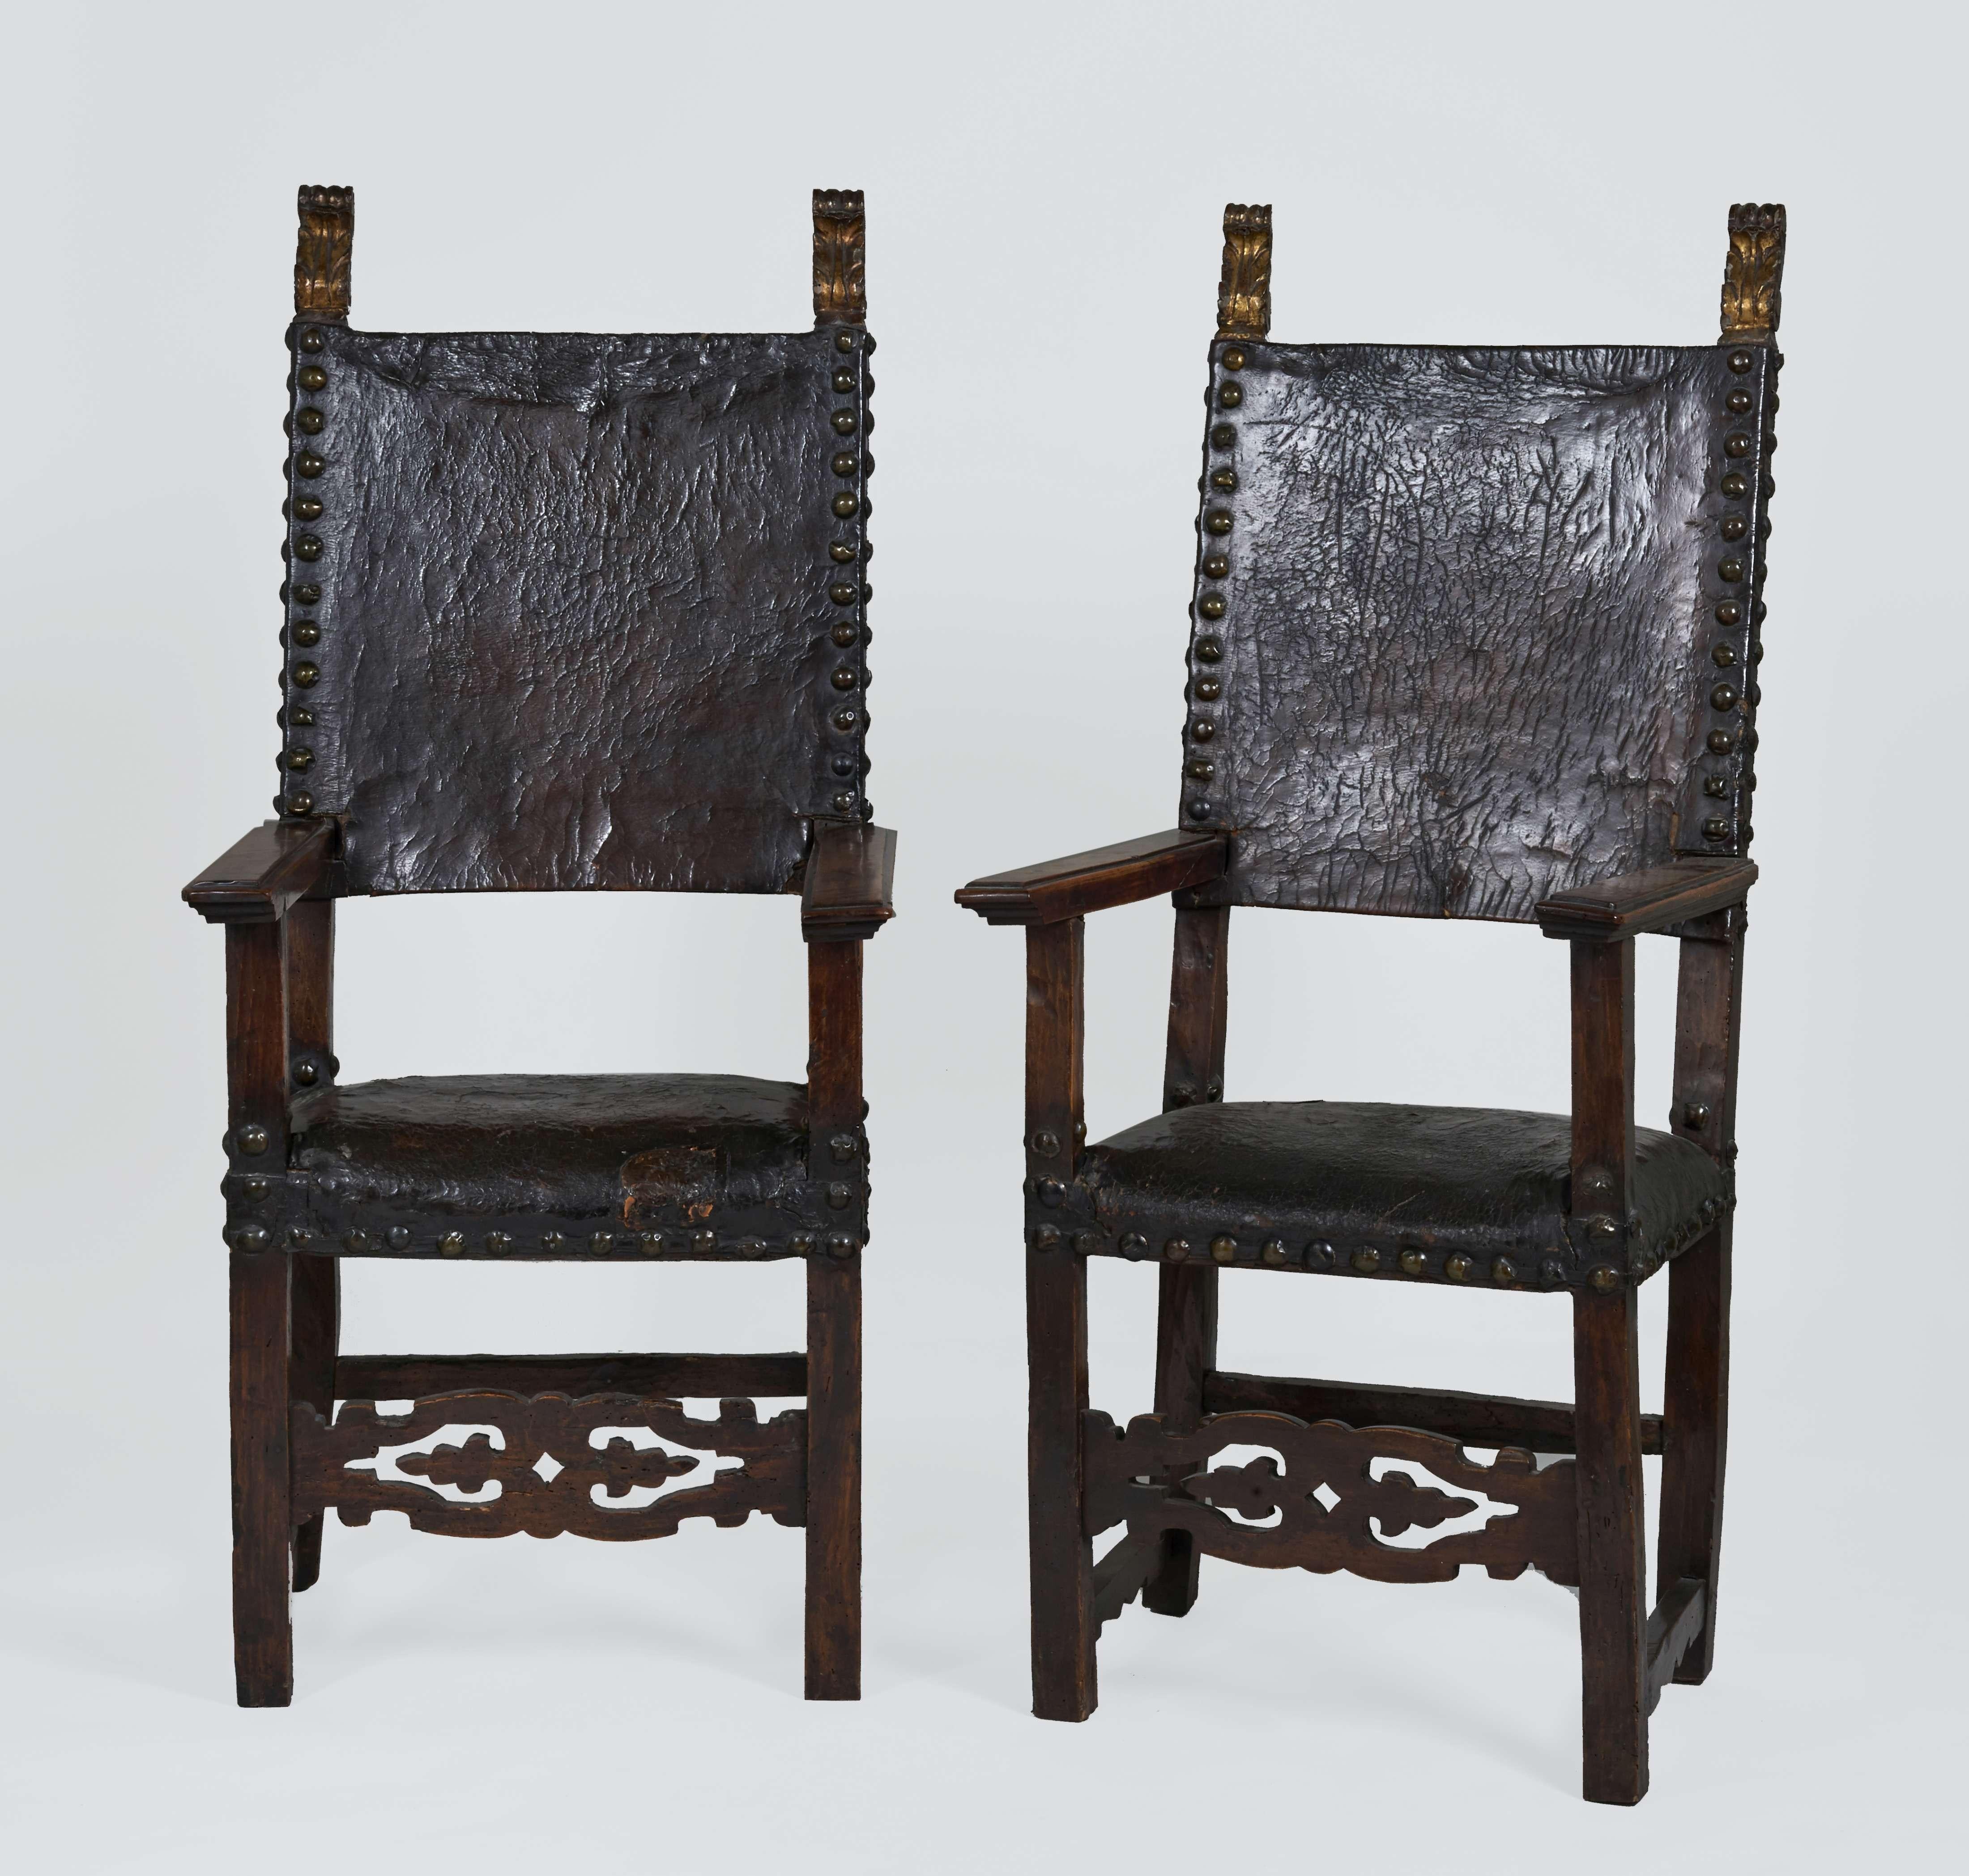 Pair of walnut chairs with openwork crossbars, leather upholstery and brass nails. The wood frame is partly gilt with a palm leaves and scrolls decor.